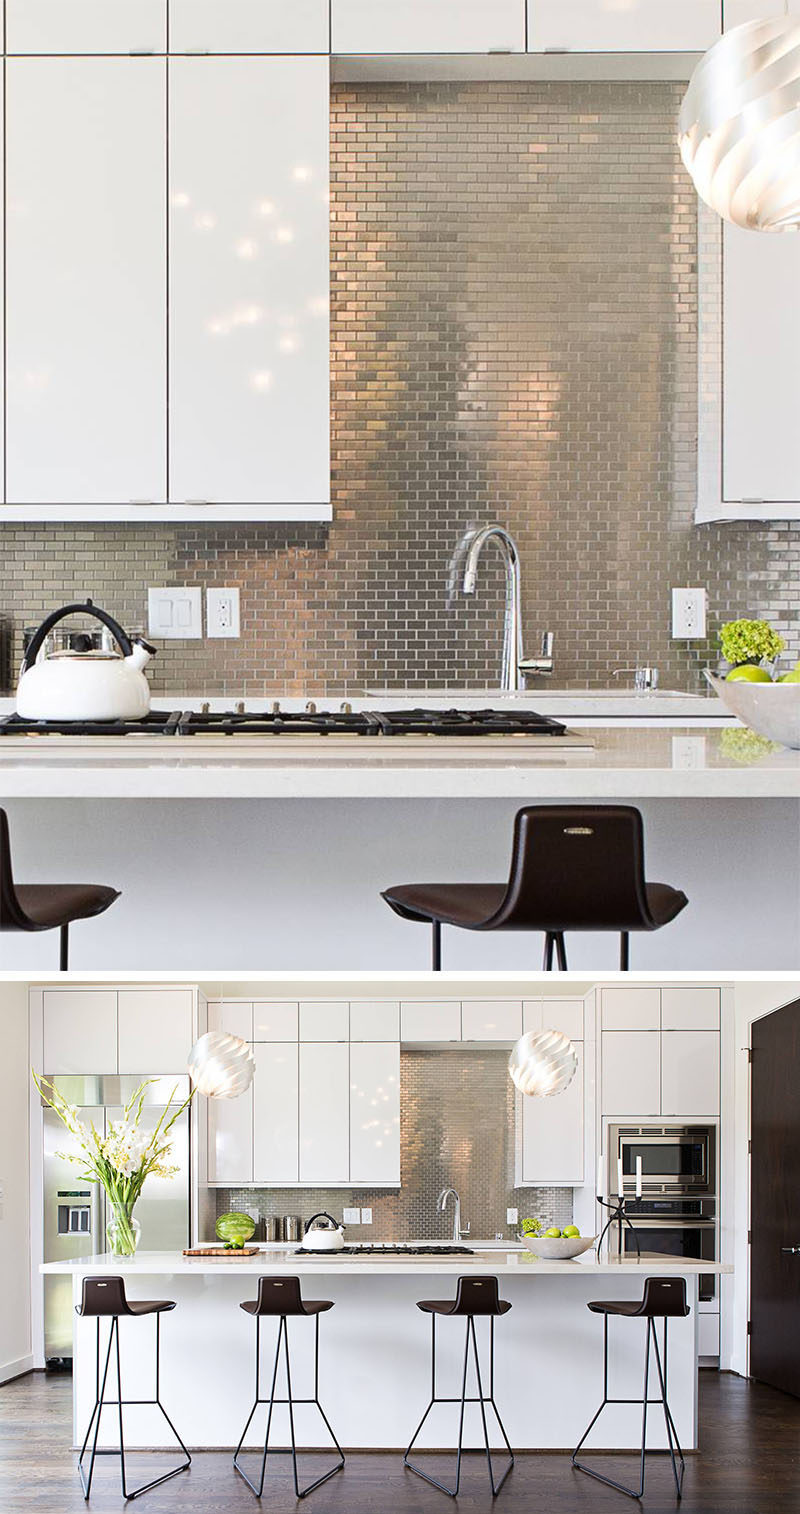 Kitchen Design Idea - Stainless Steel Backsplash // Small stainless steel tiles have been arranged in a brick-like pattern to contrast the white cabinetry and to help brighten the kitchen.